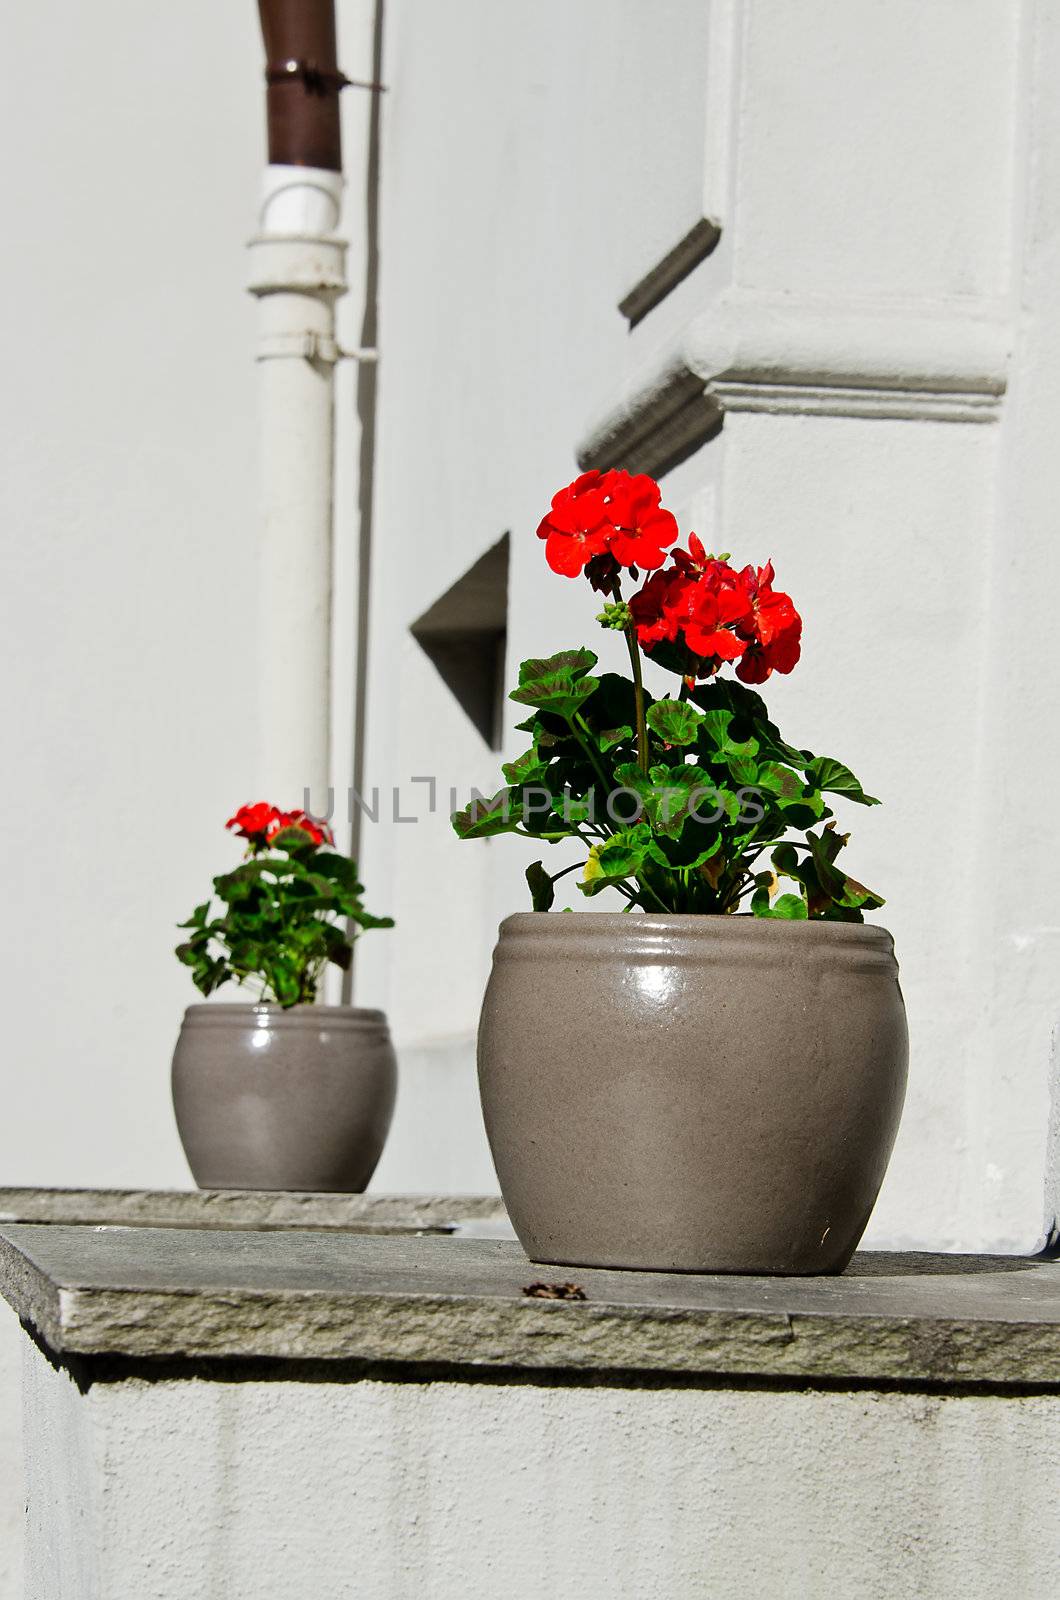 Two pots of flowers by Nanisimova